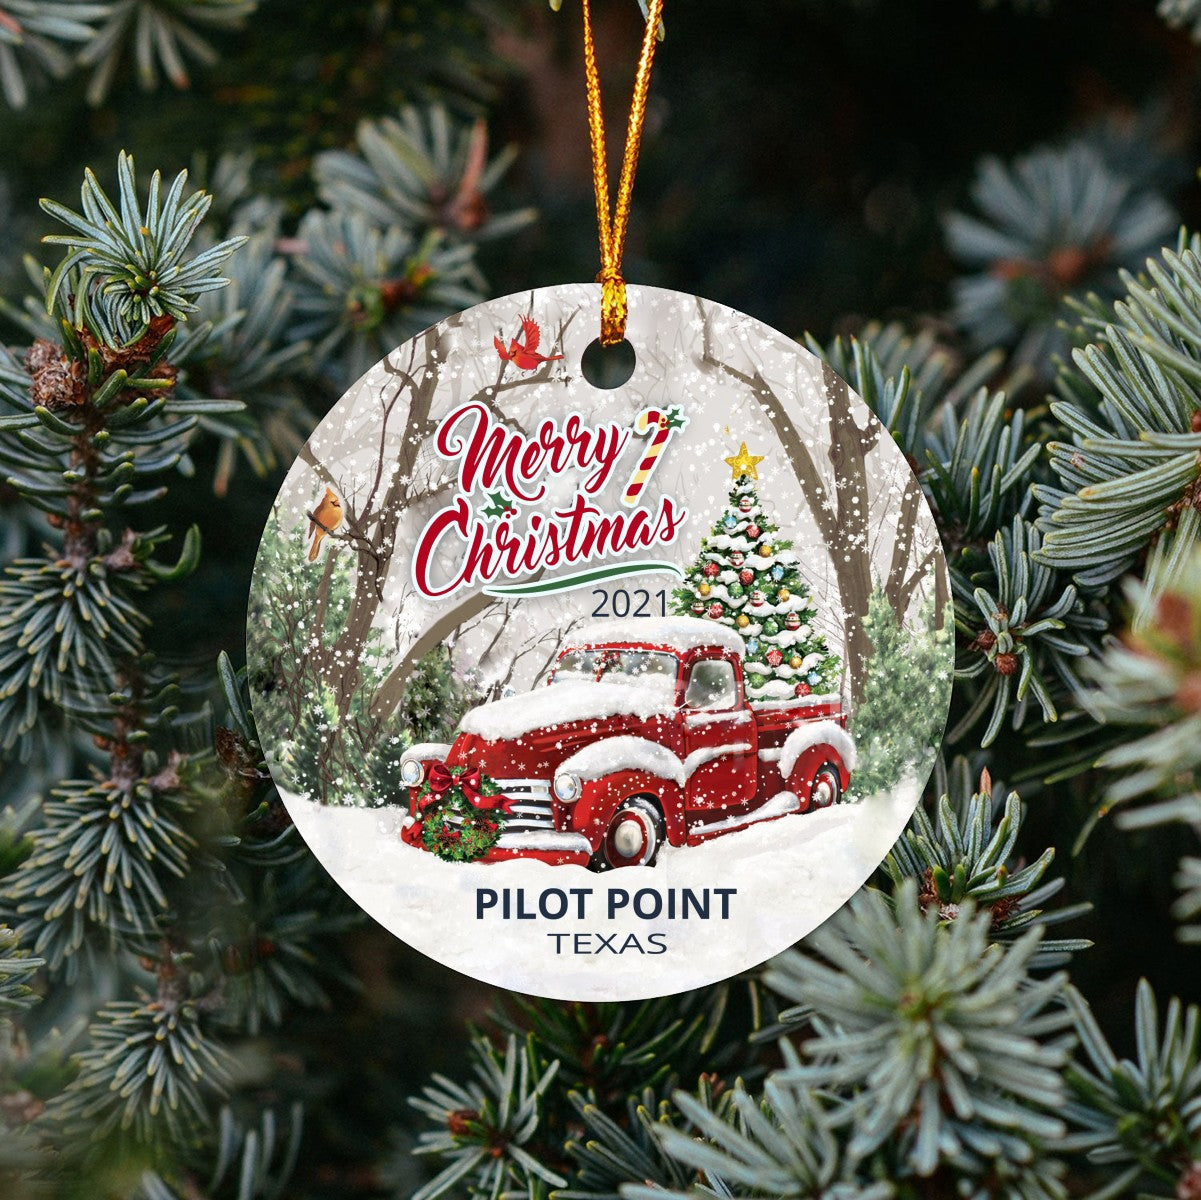 Christmas Tree Ornaments Pilot Point - Ornament With Name City, State Pilot Point Texas TX Ornament - Red Truck Xmas Ornaments 3'' Plastic Gift For Family, Friend And Housewarming